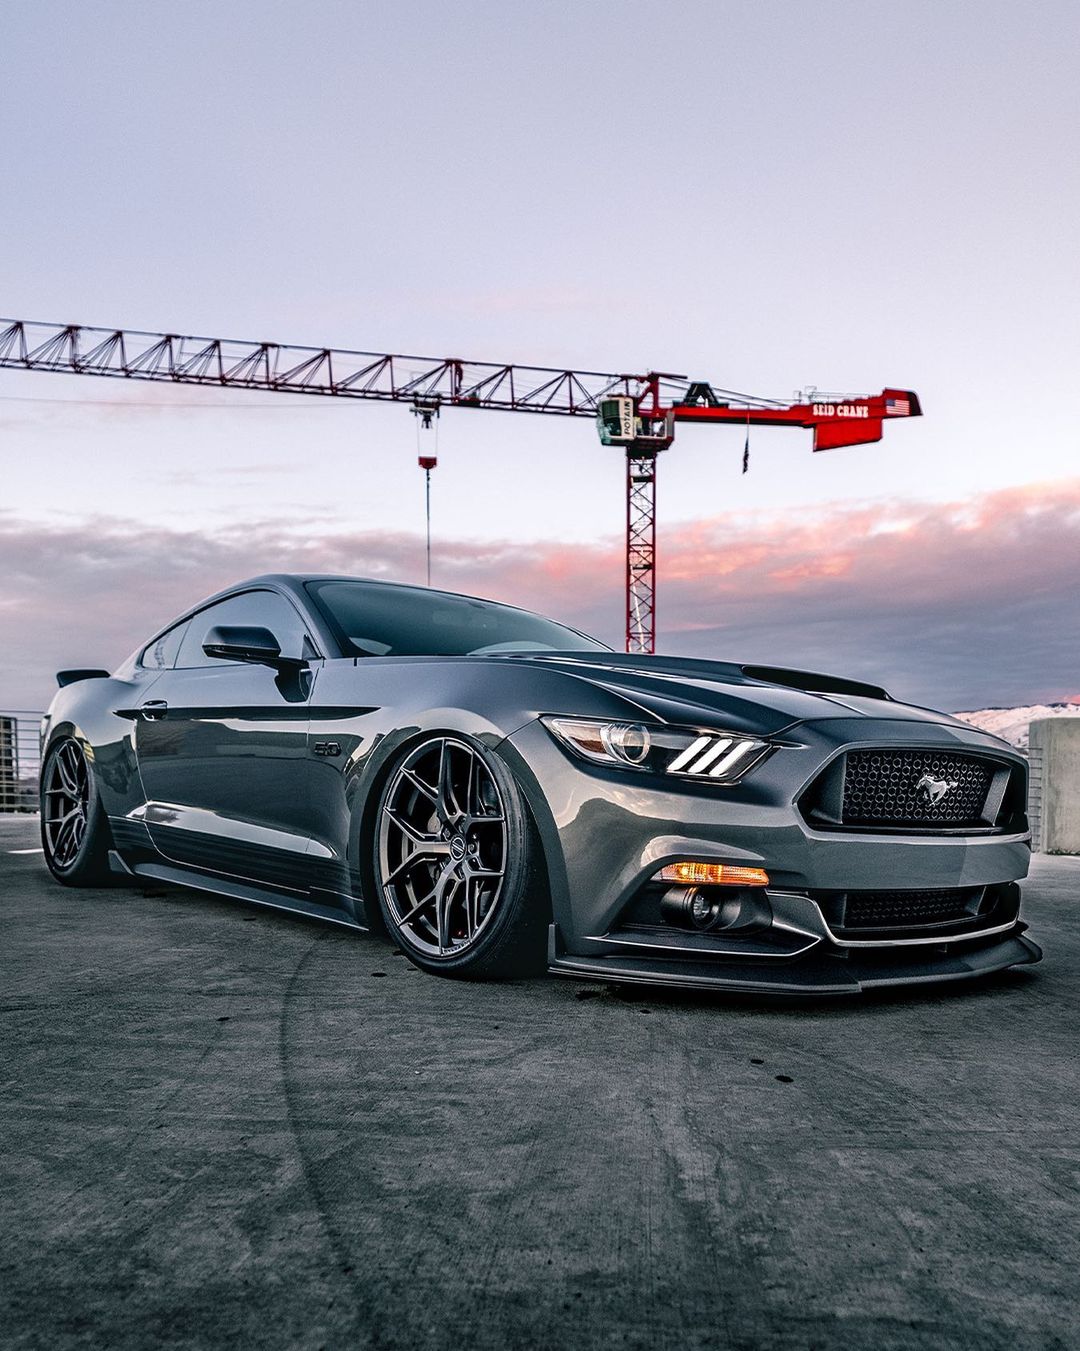 S650 Mustang Authorized Vossen Wheels Dealer: Hybrid Series and Full Forged Wheels For Mustang S650 155183964_762808791303226_7173369035649317061_n